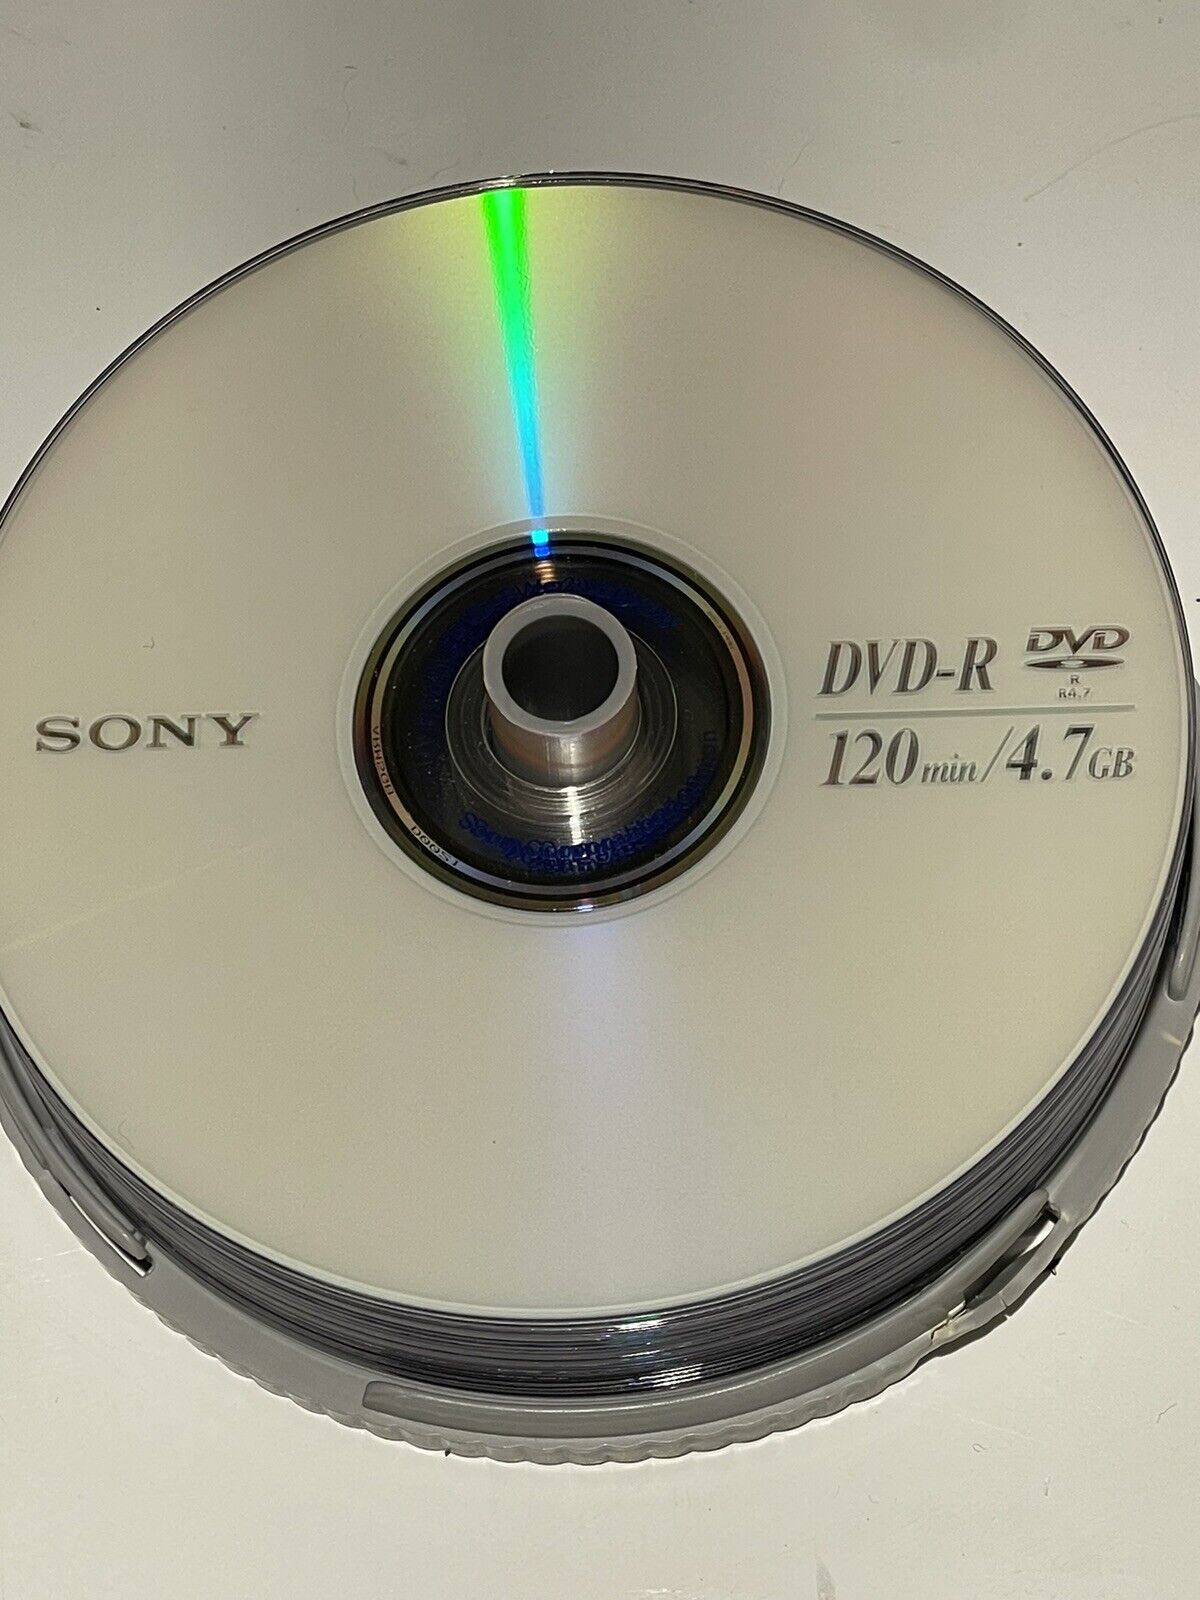 Used SONY DVD-R 17 Pack 4.7 GB 120 Minutes Blank Media Discs - UBB.threads